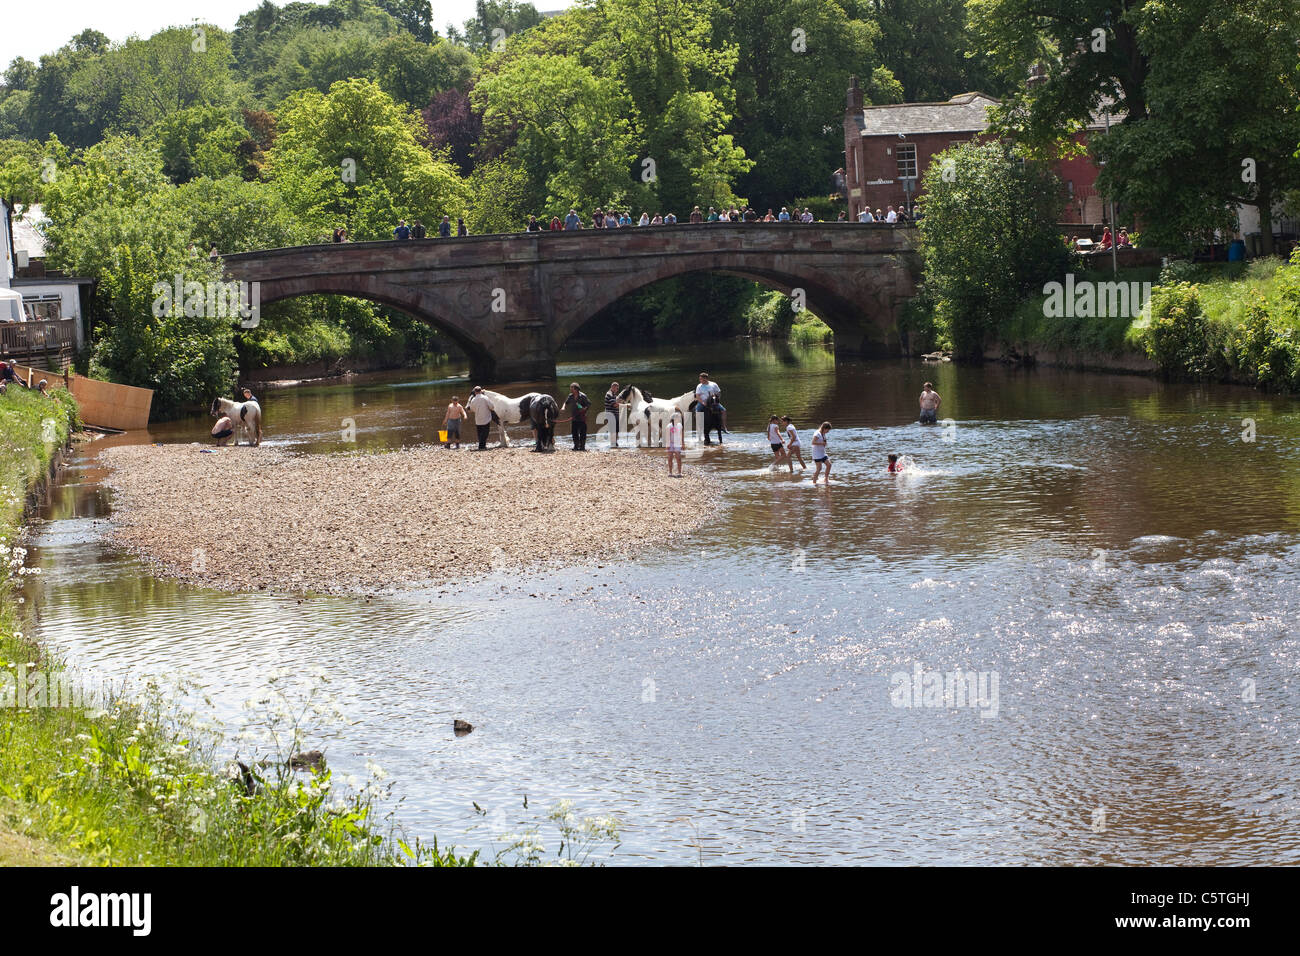 Gypsies washing horses in the River Eden at Appleby Horse Fair, Appleby in Westmoreland. Stock Photo